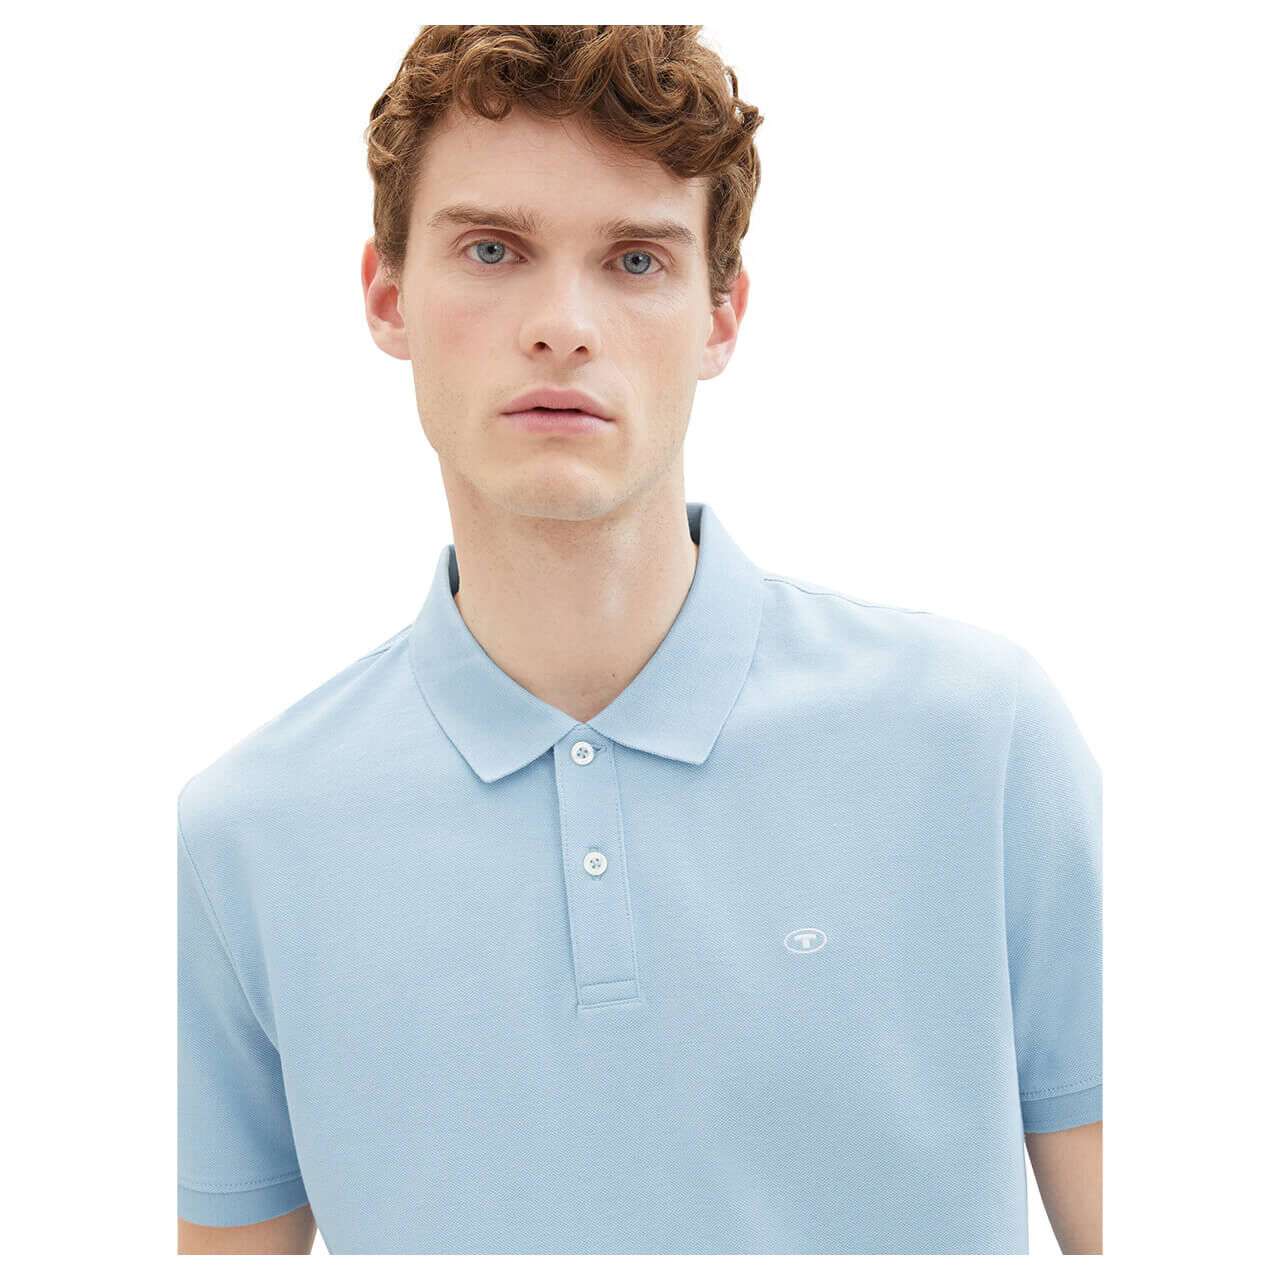 Tom Tailor Herren Piqué Poloshirt contrast washed out blue